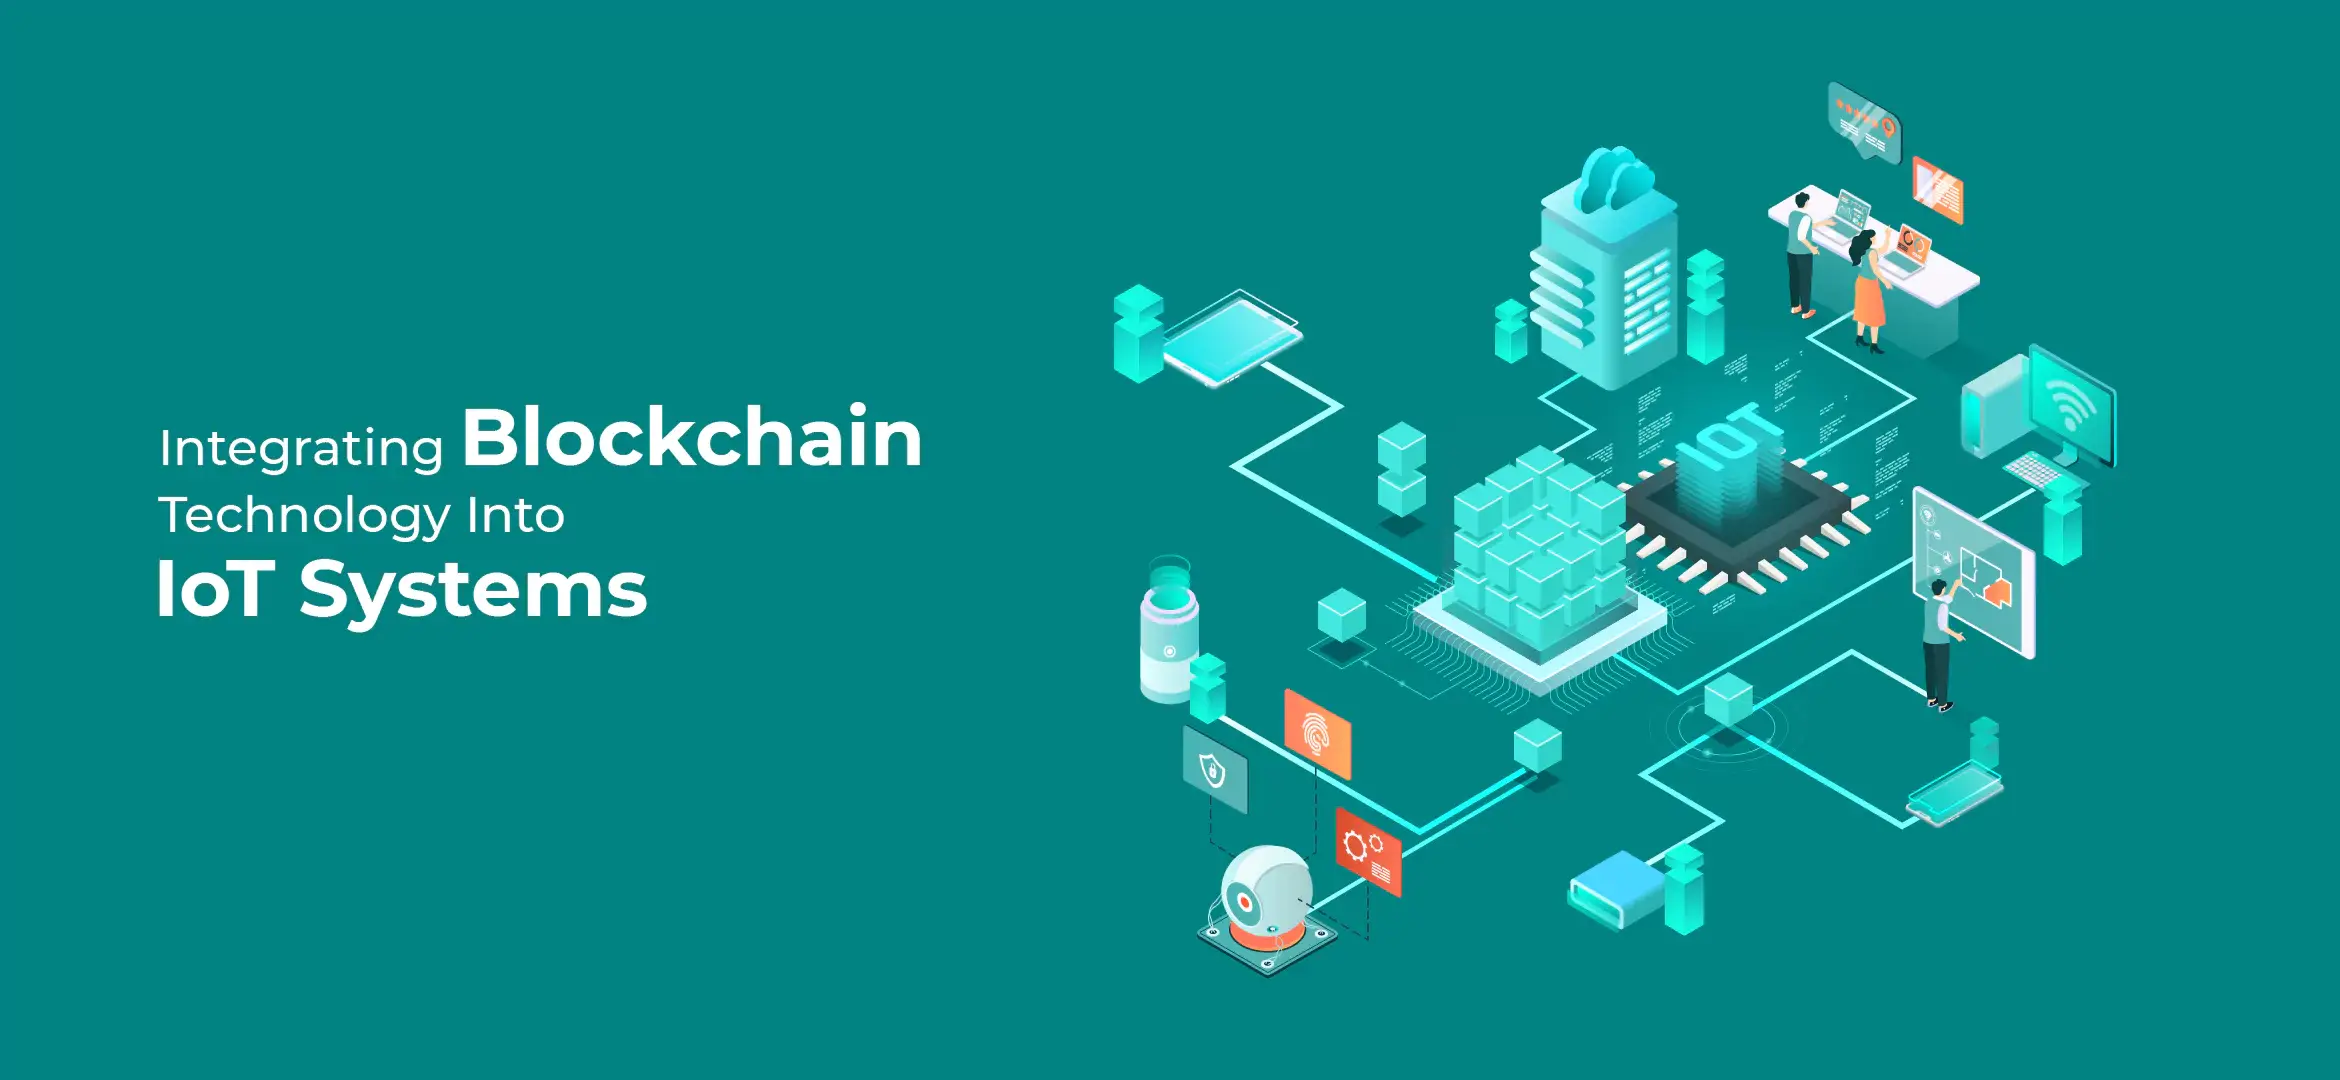 Integrating Blockchain Technology into IoT Systems